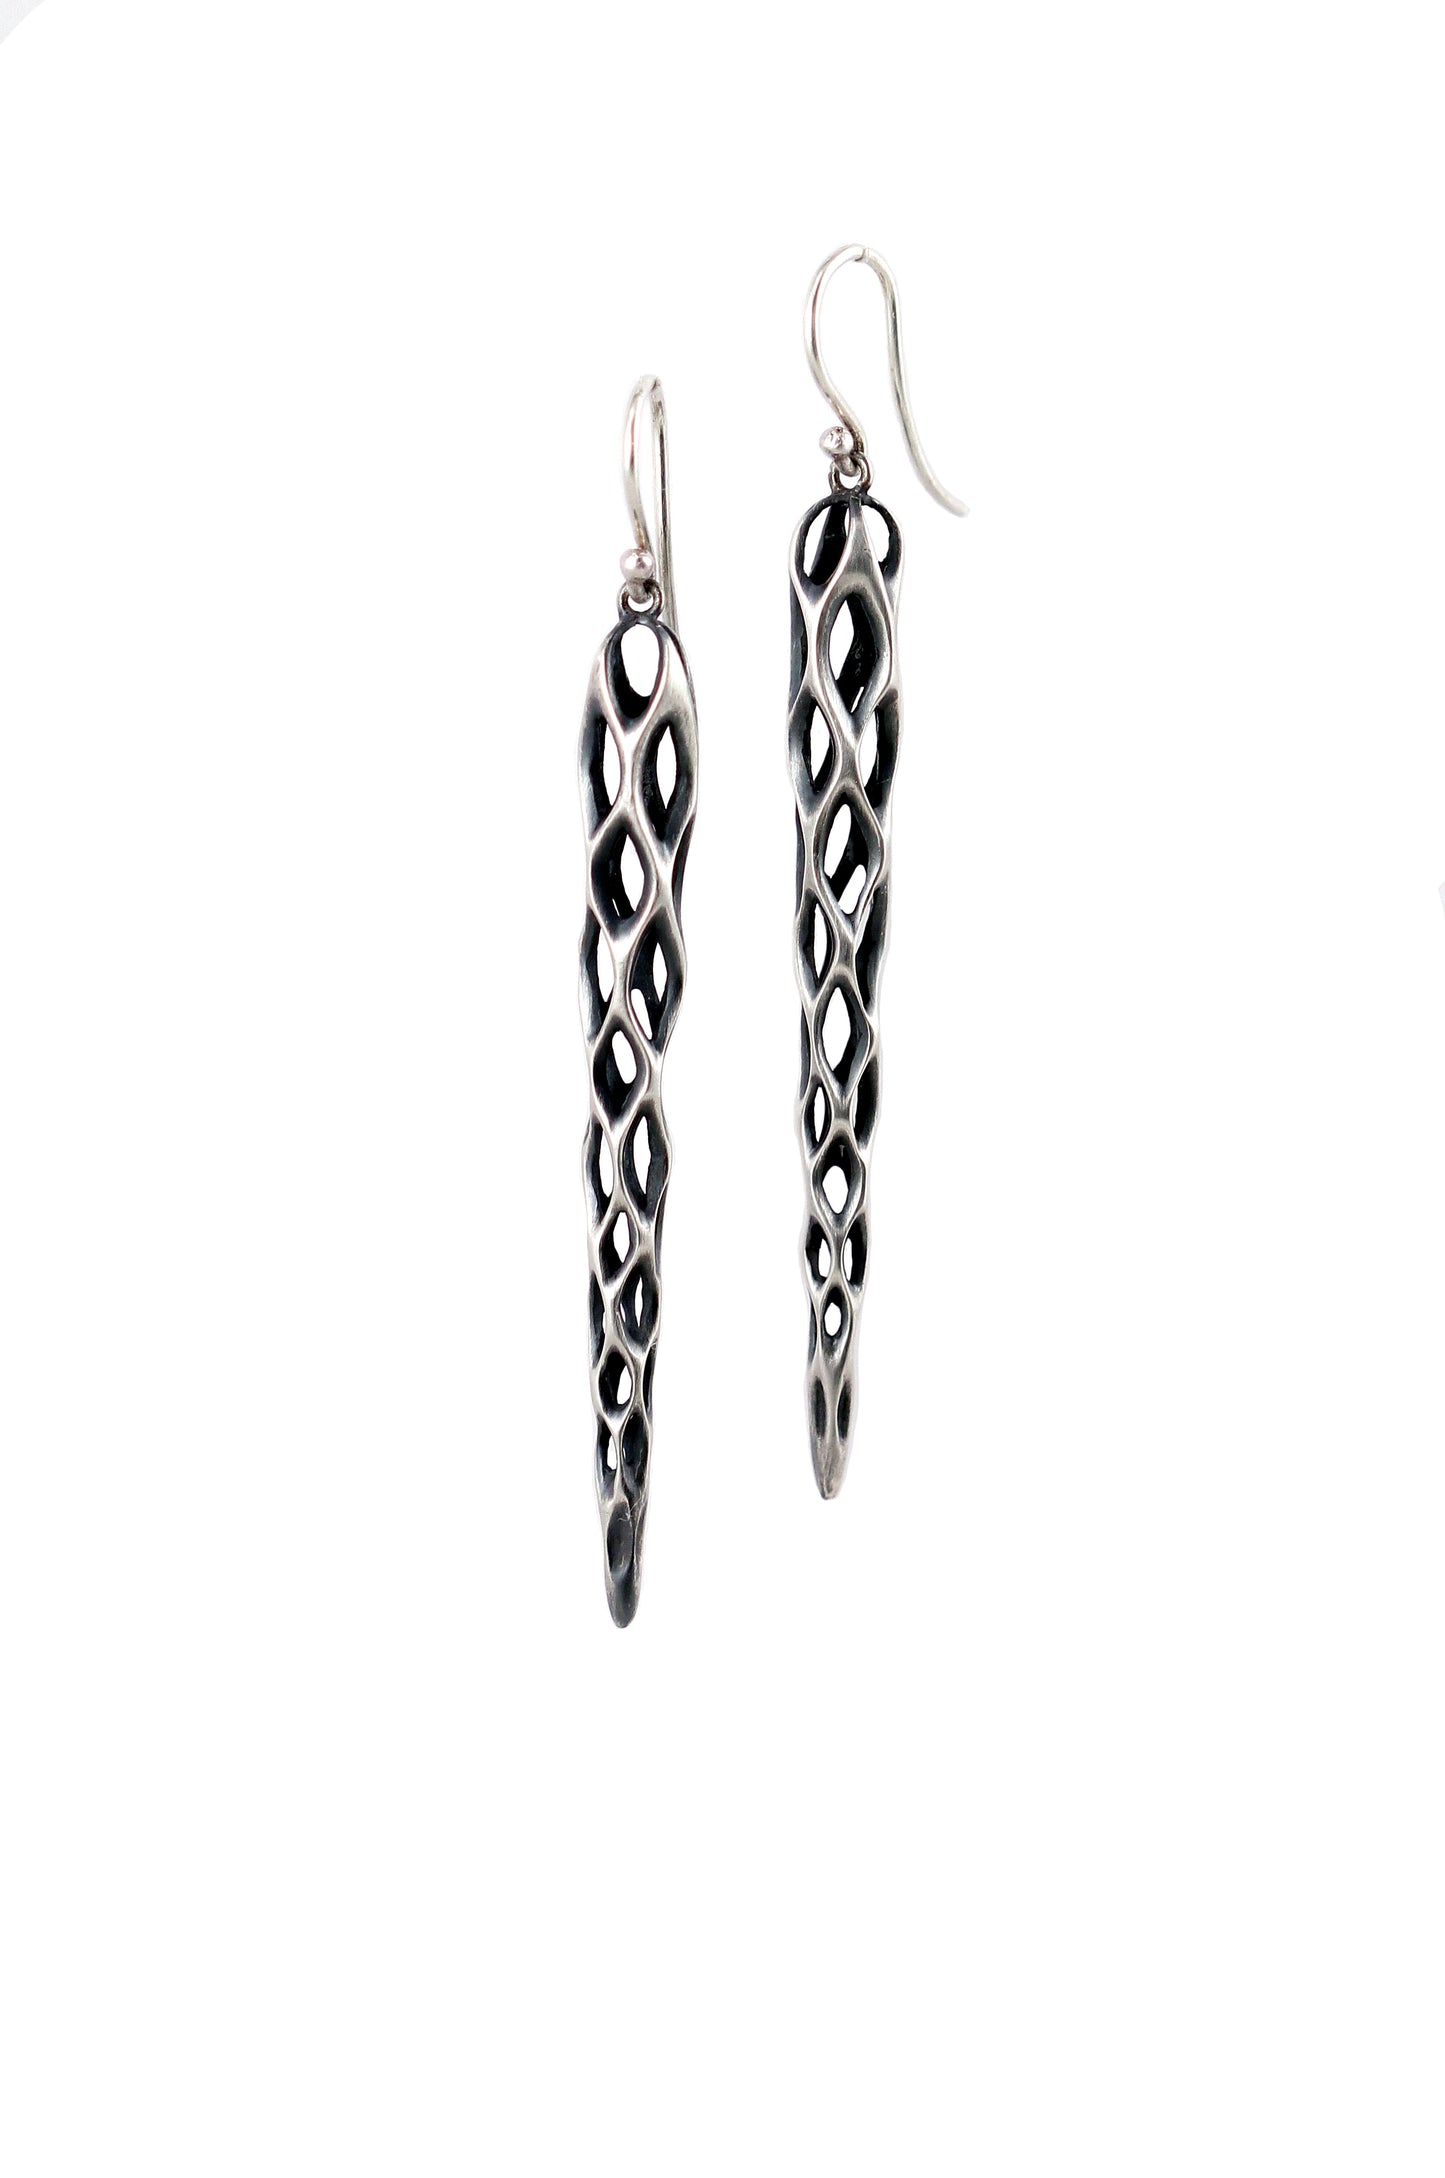 Cholla Earrings Large in Antique Sterling Silver